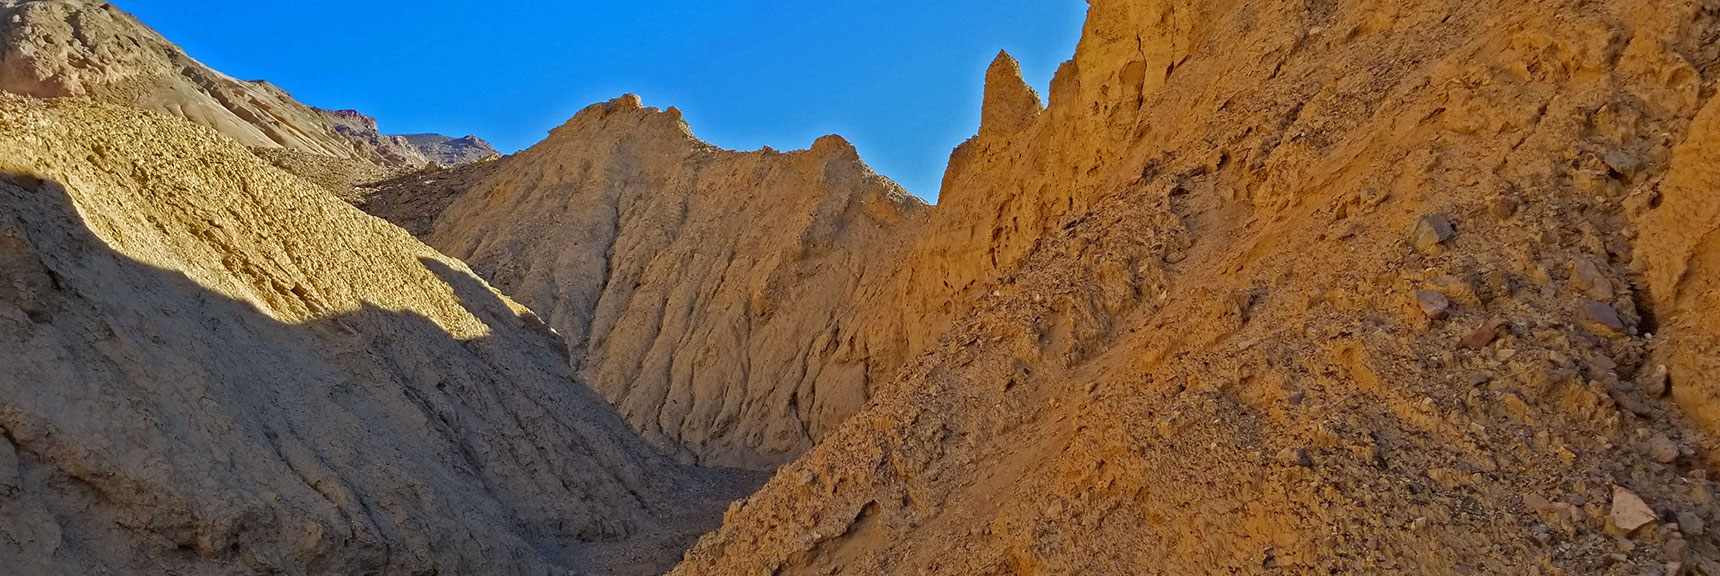 Smaller Side Canyon in Artist's Pallet Area | Artists Drive Hidden Canyon Hikes | Death Valley National Park, California